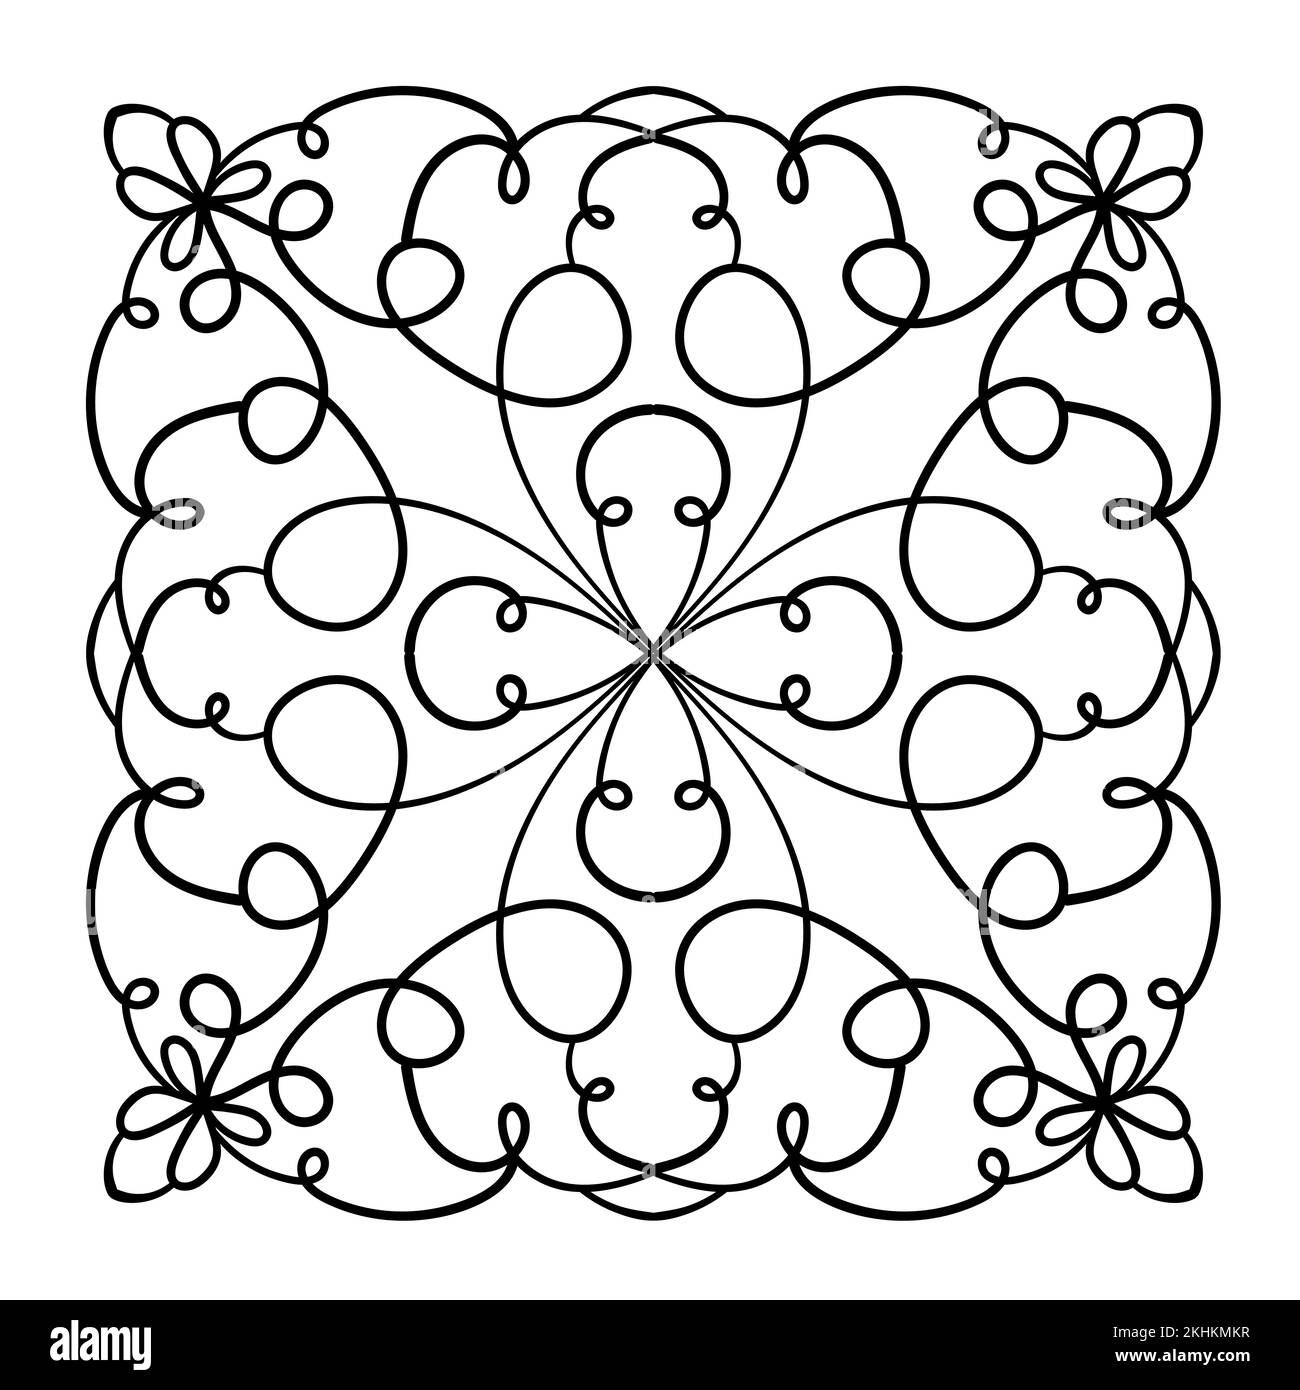 Mandala ornament. Coloring book page. T-shirt, greeting card, stickers, tattoos, decorations for interior design. Vectorillustration on white backgrou Stock Vector